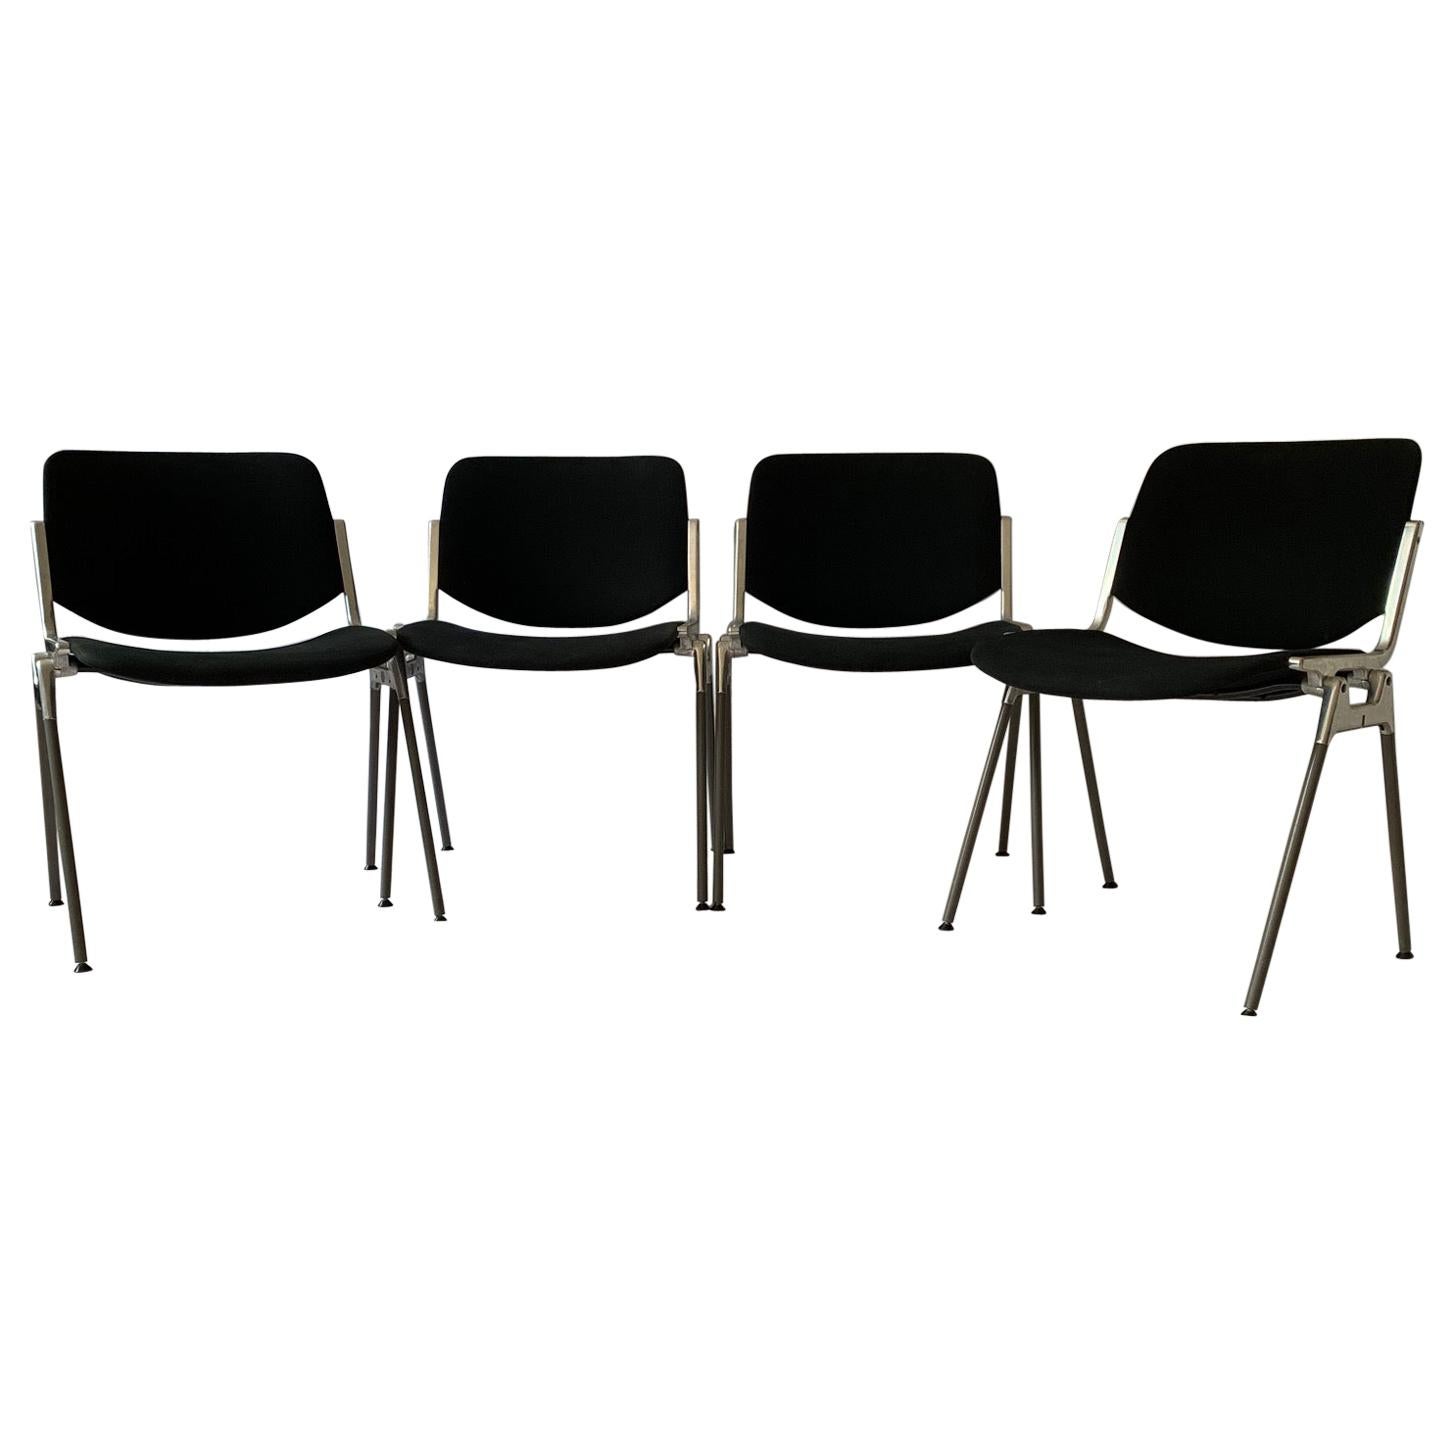 A set of four Castelli DSC 106 chairs, designed by Giancarlo Piretti, Italy, 199 For Sale